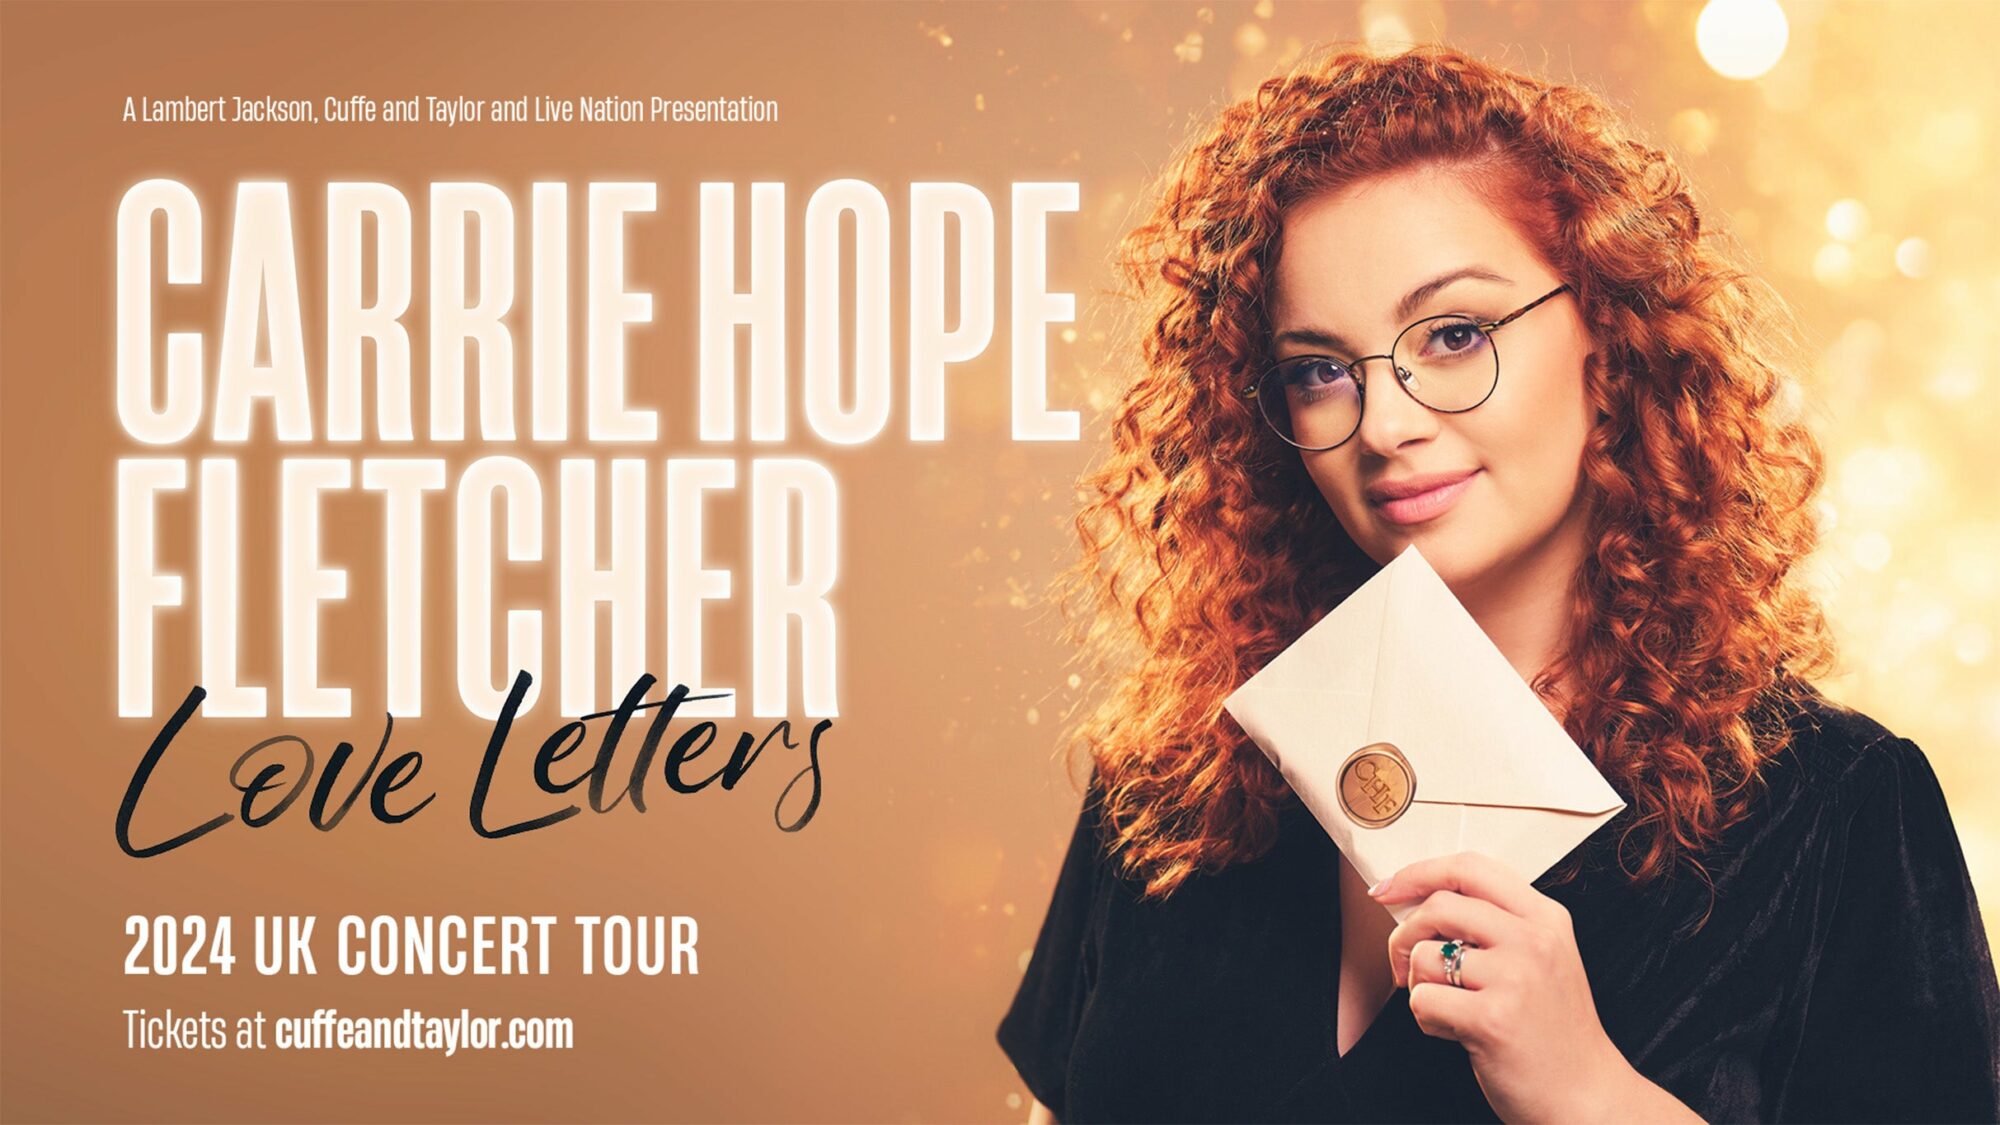 Image name Carrie Hope Fletcher Love Letters at York Barbican York the 31 image from the post Events in Yorkshire.com.